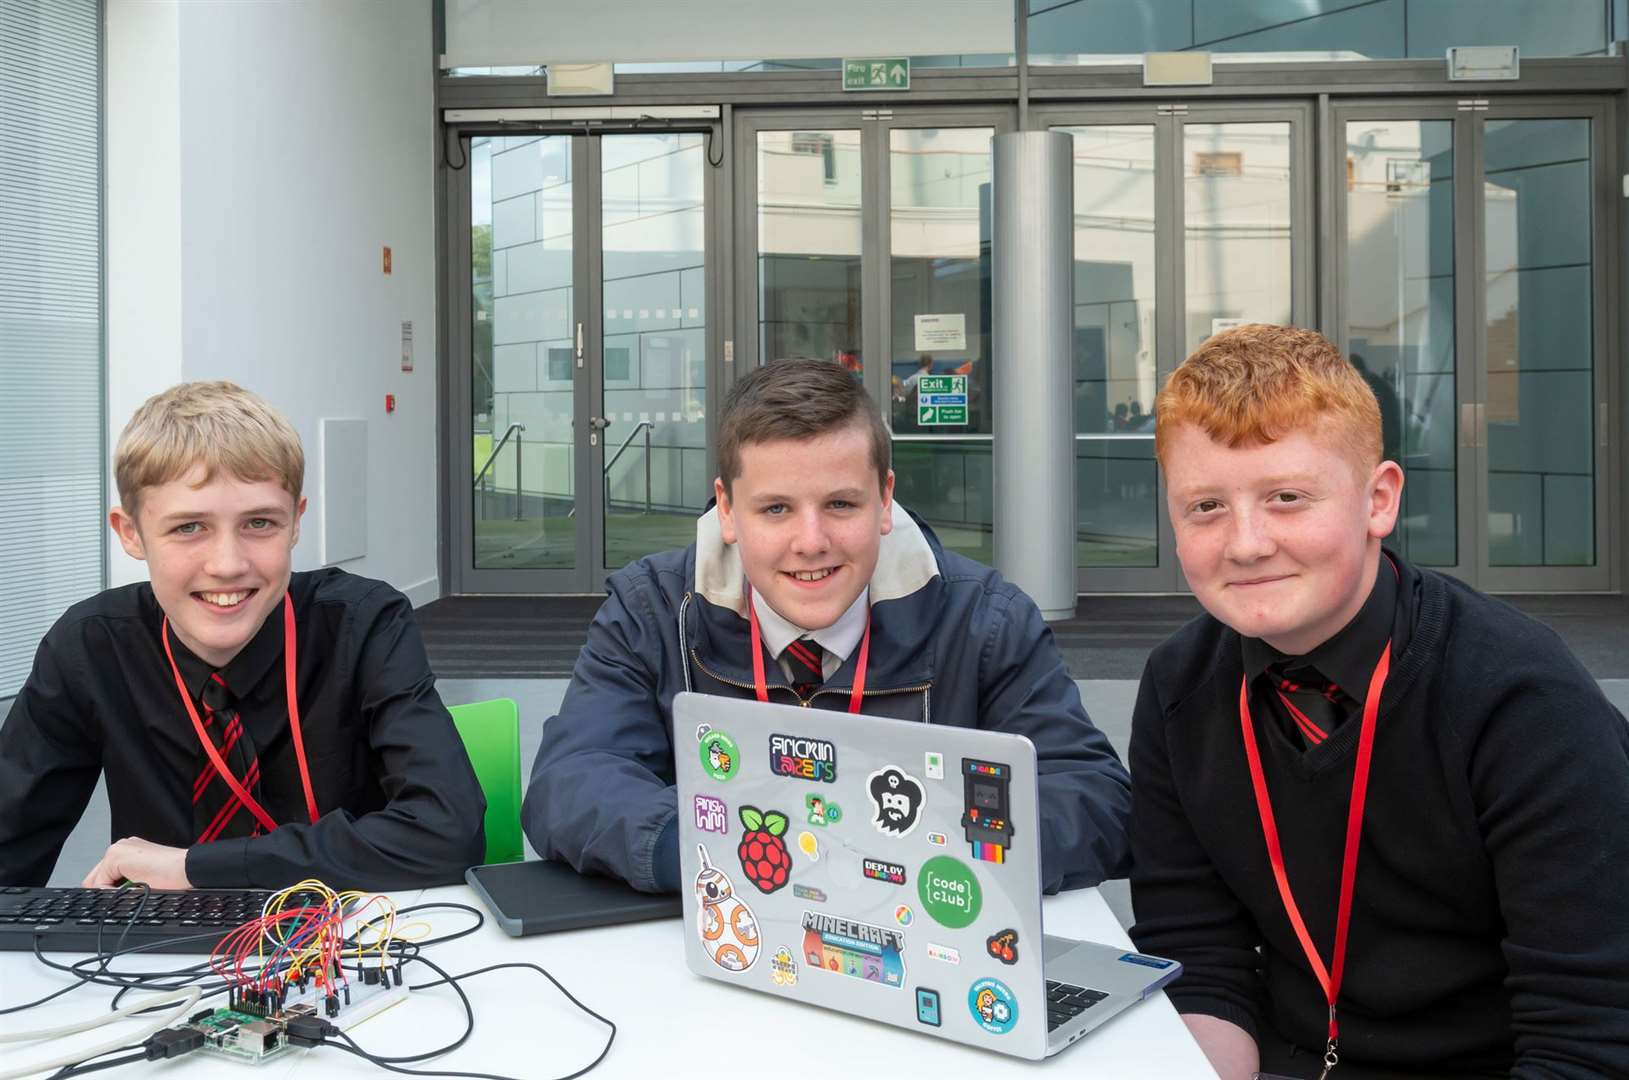 Pupils from Turriff Academy took part in the GamesCon event.